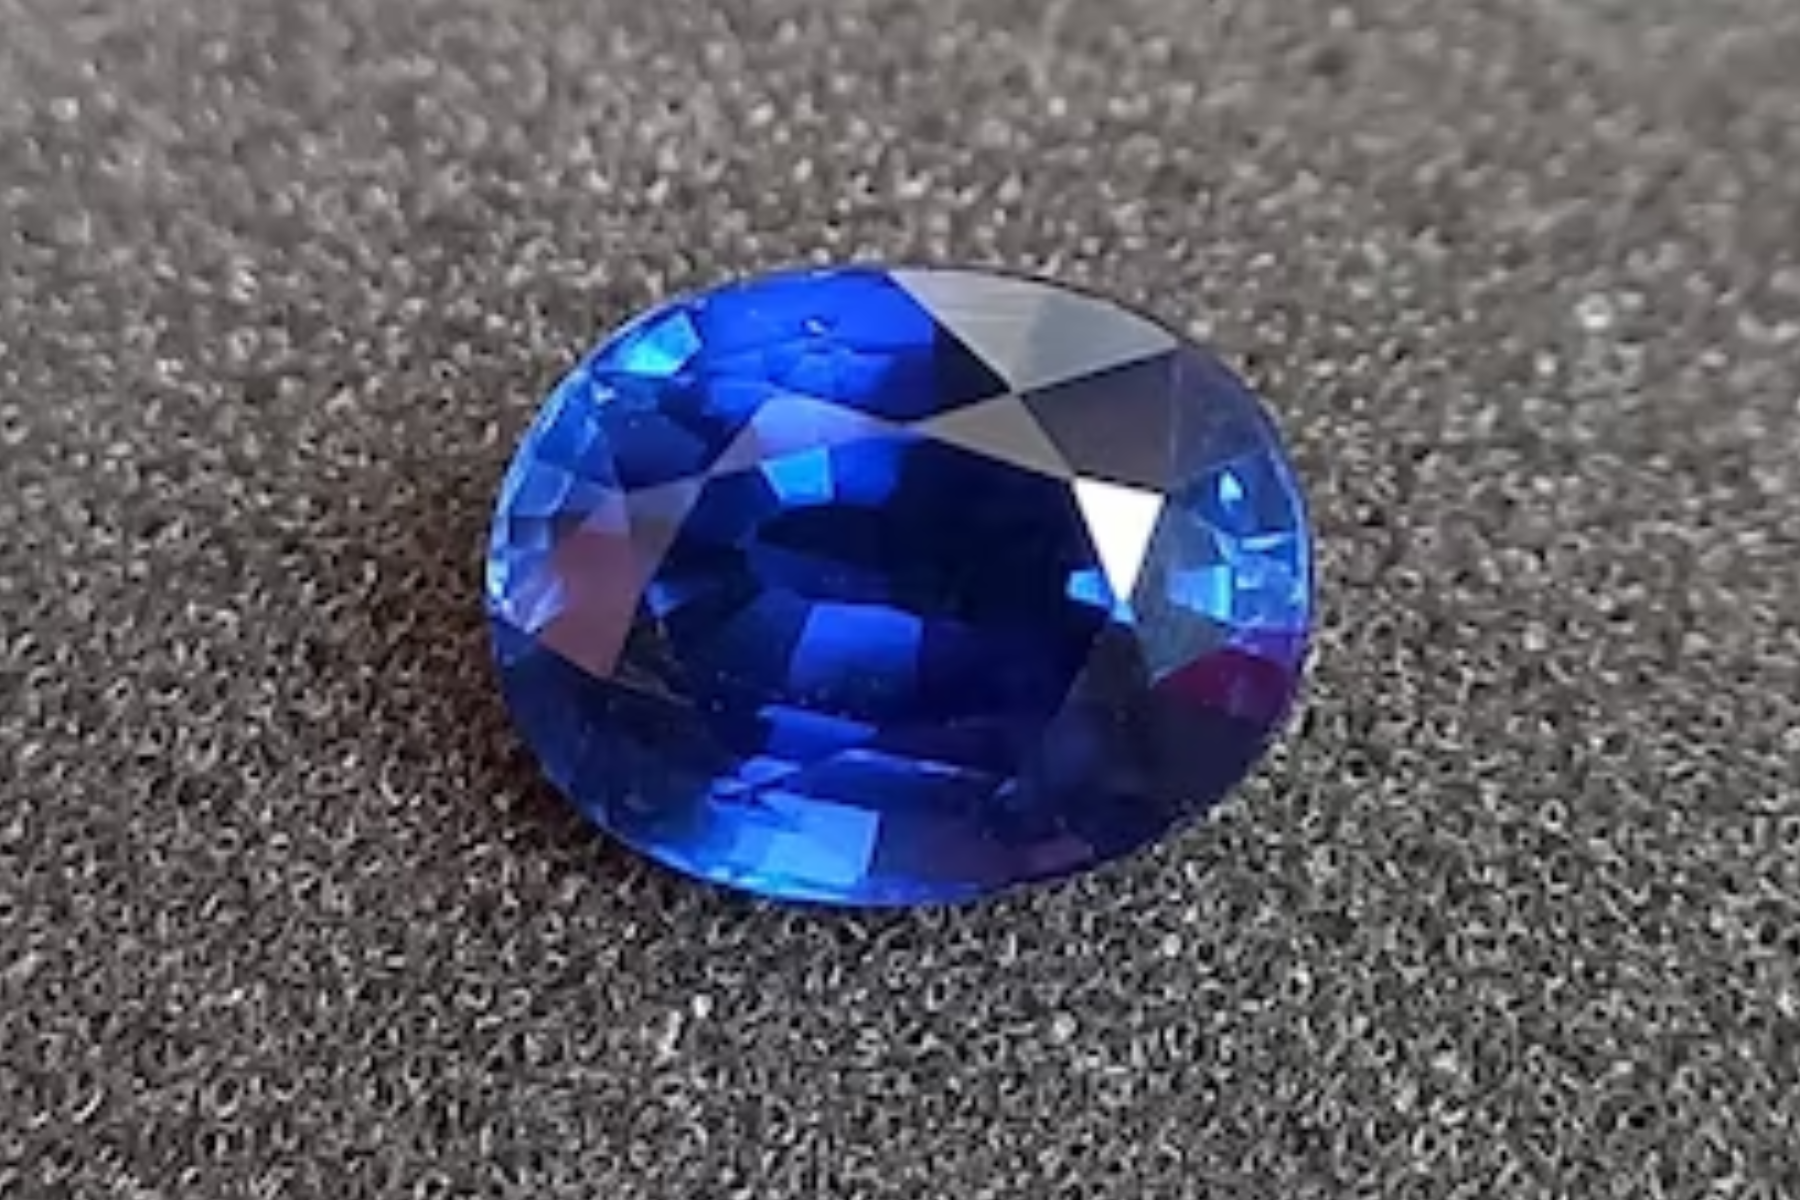 The oval shaped sapphire on the stone ground